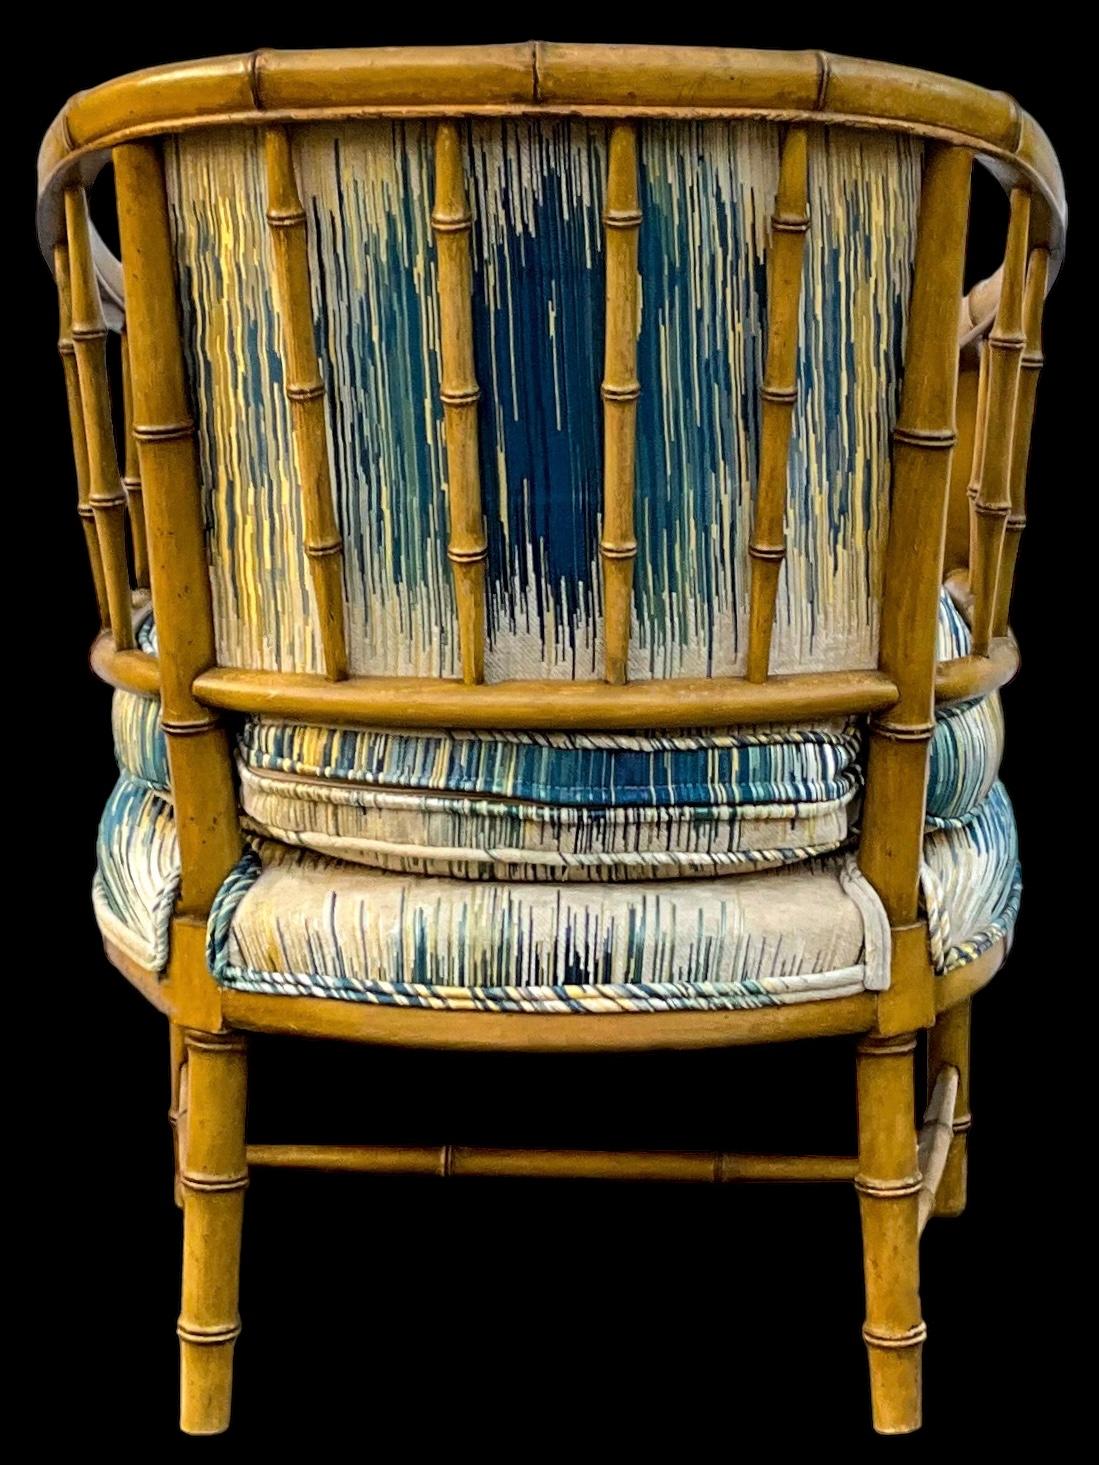 Mid-Century Regency Style Carved & Painted Faux Bamboo Barrel Club Chairs -Pair For Sale 2